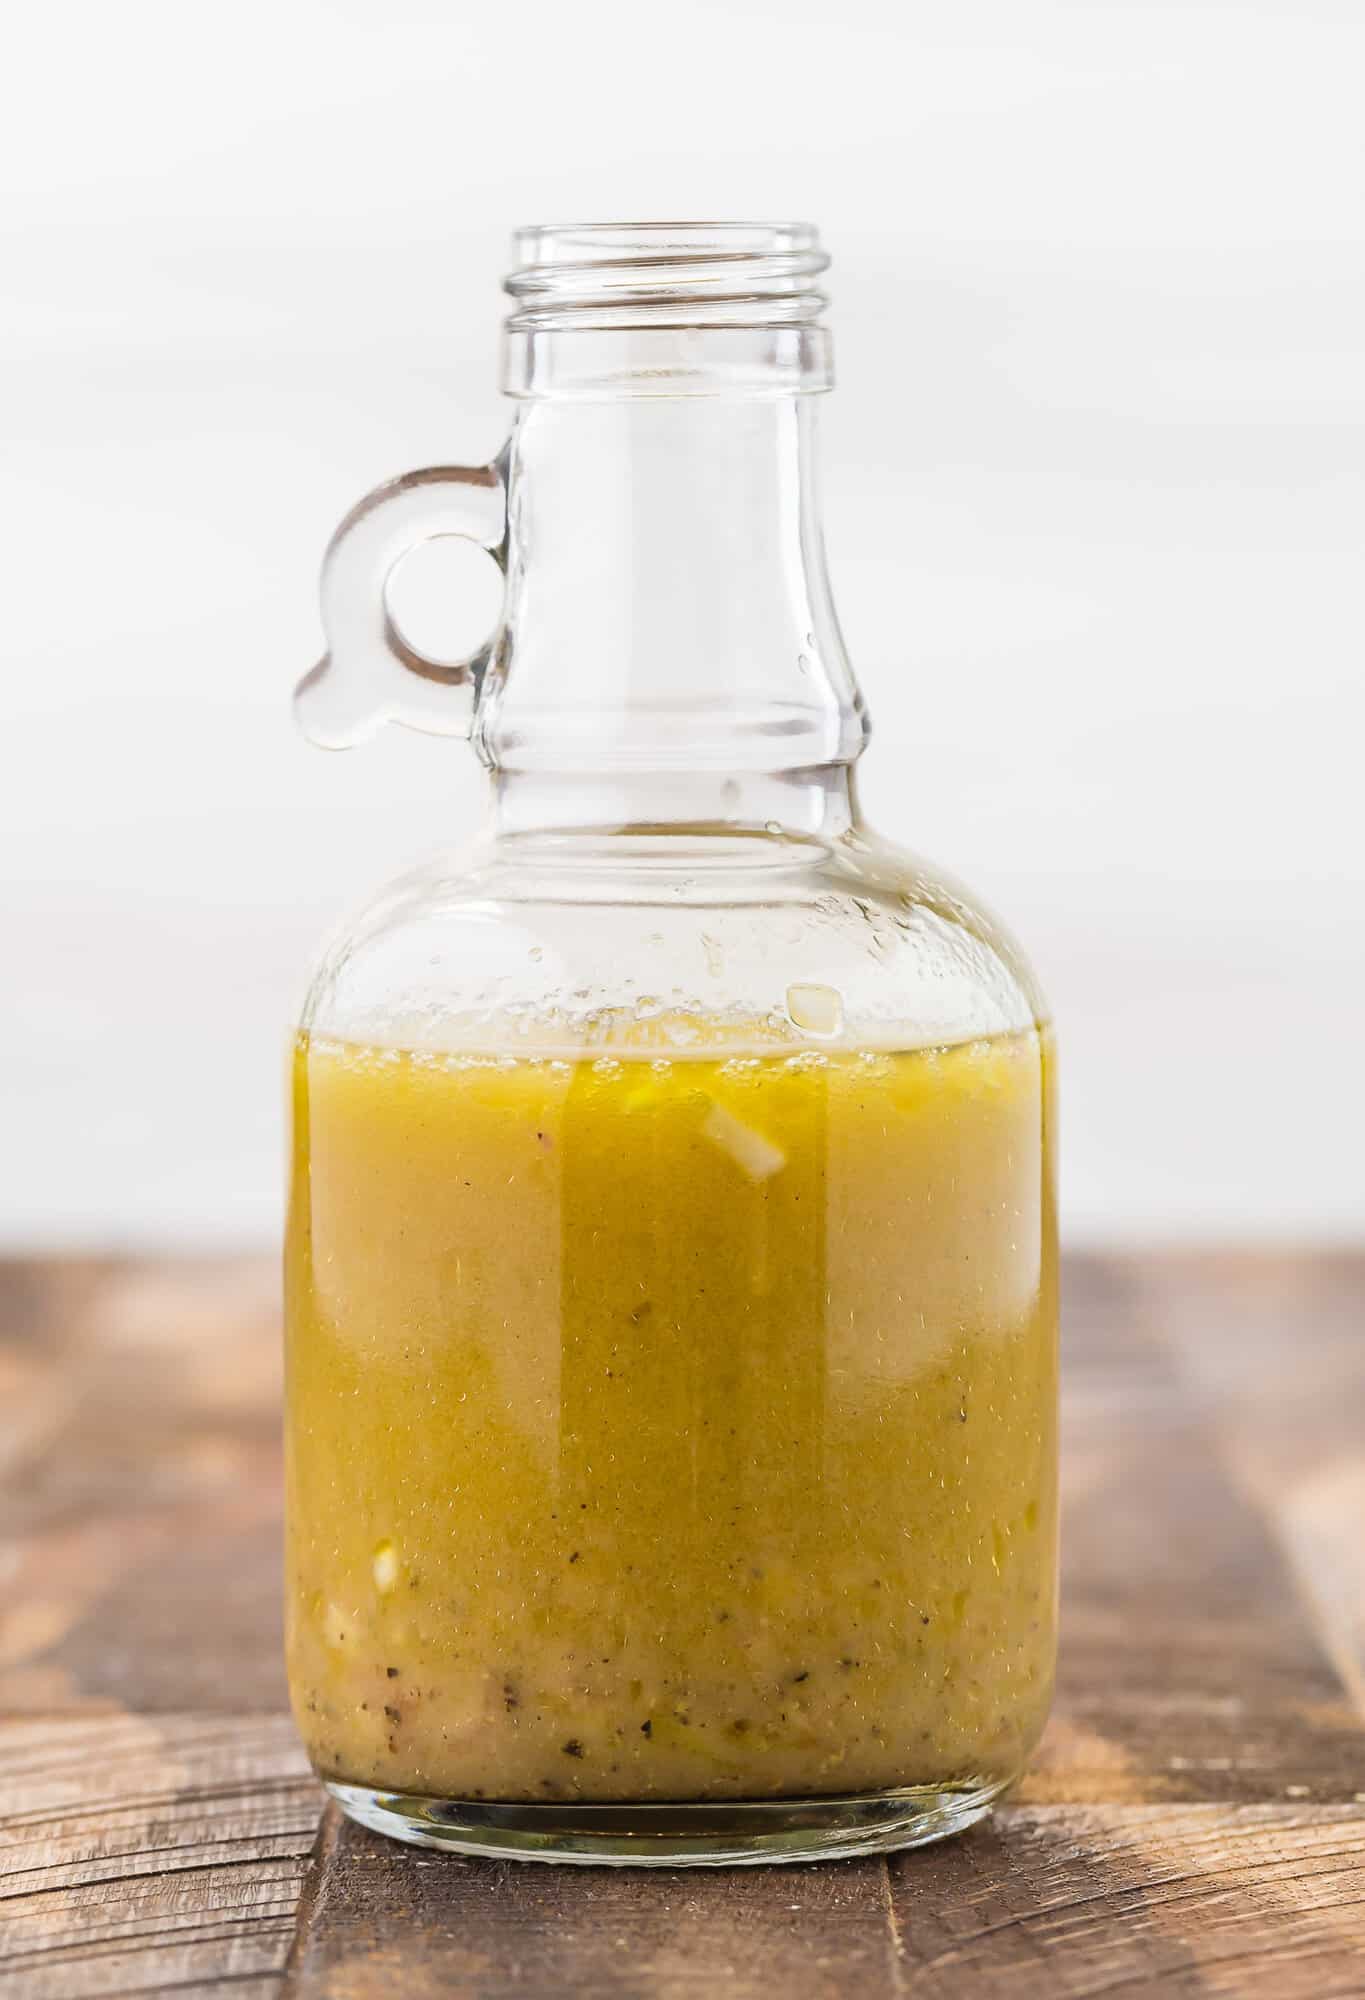 Salad dressing in a small jar on a wooden surface.